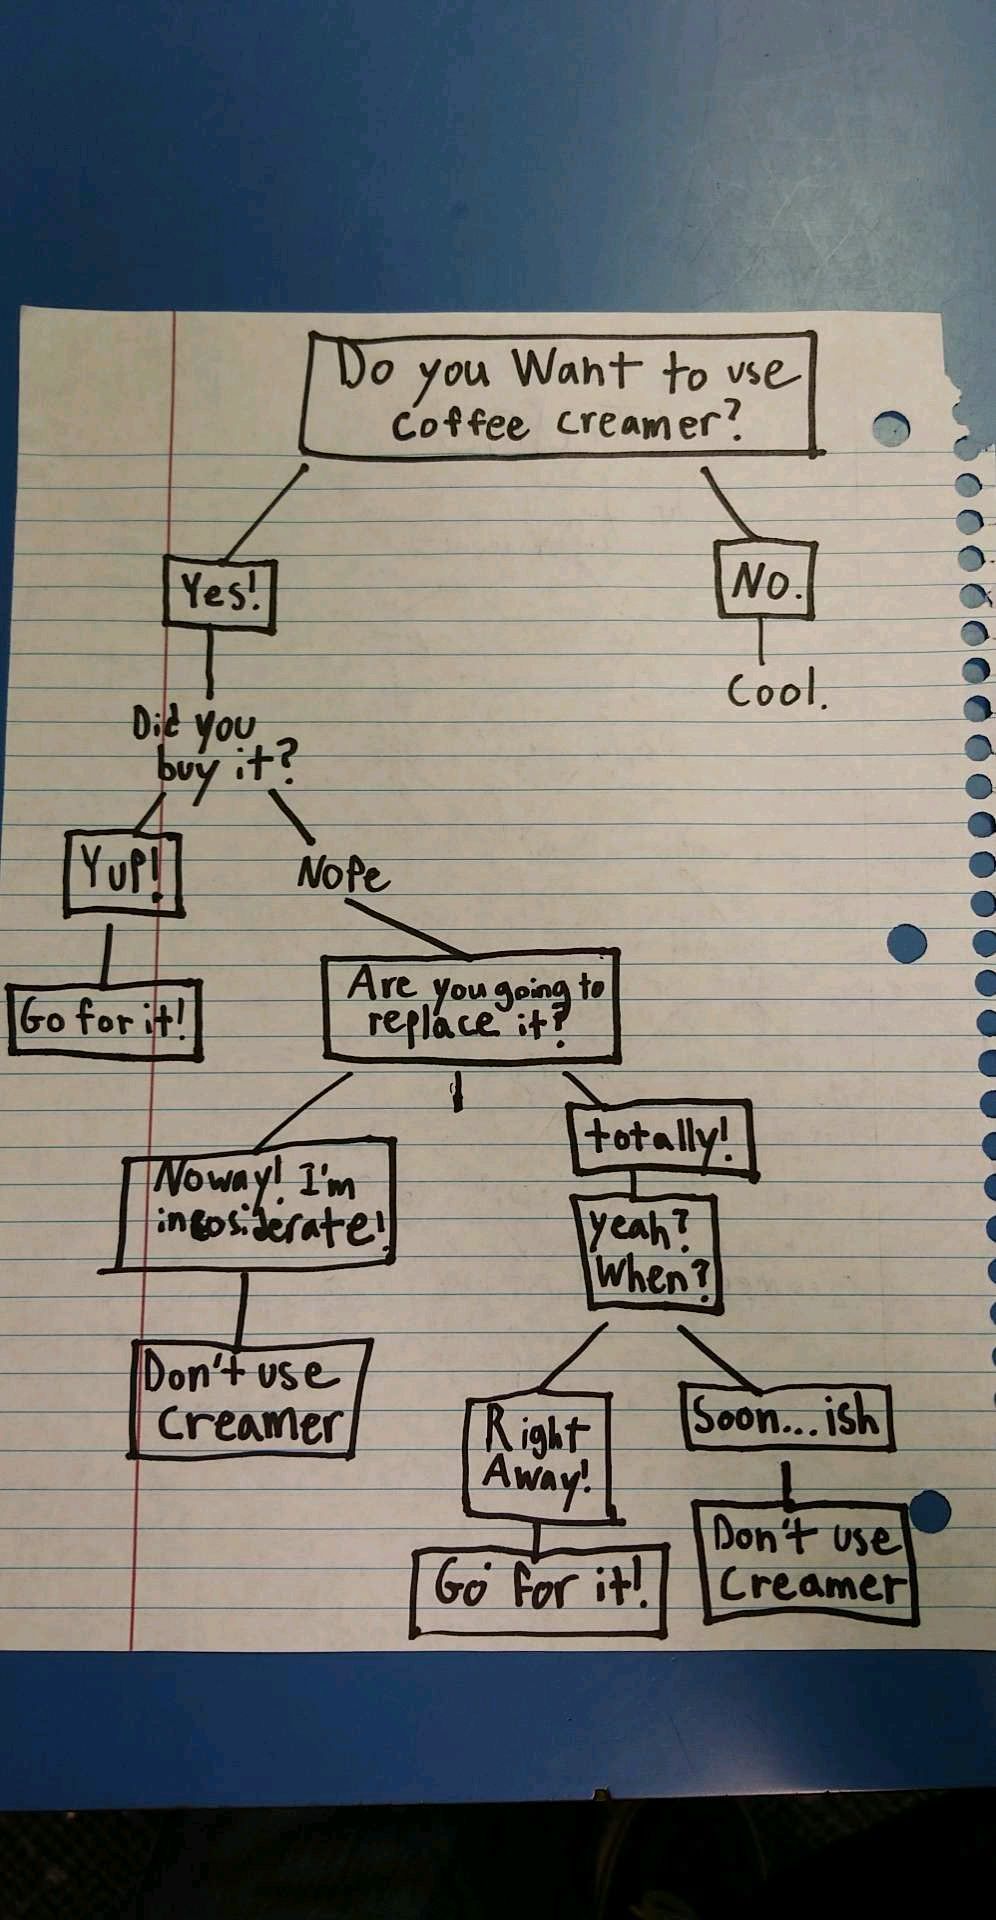 Co-workers keep stealing my creamer. Hopefully this chart helps